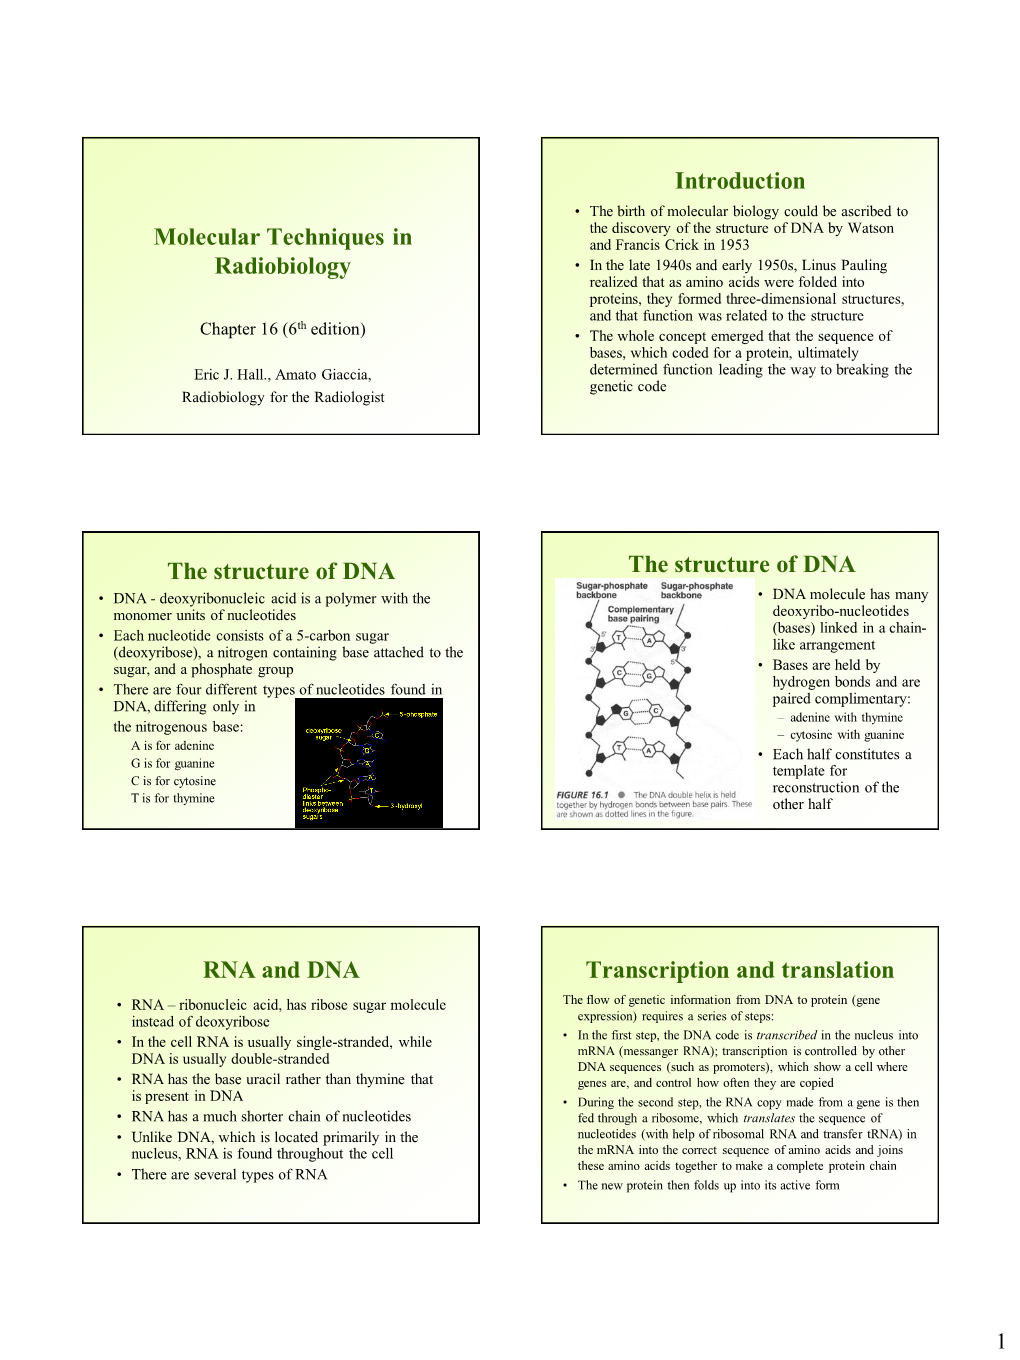 Molecular Techniques in Radiobiology Introduction The